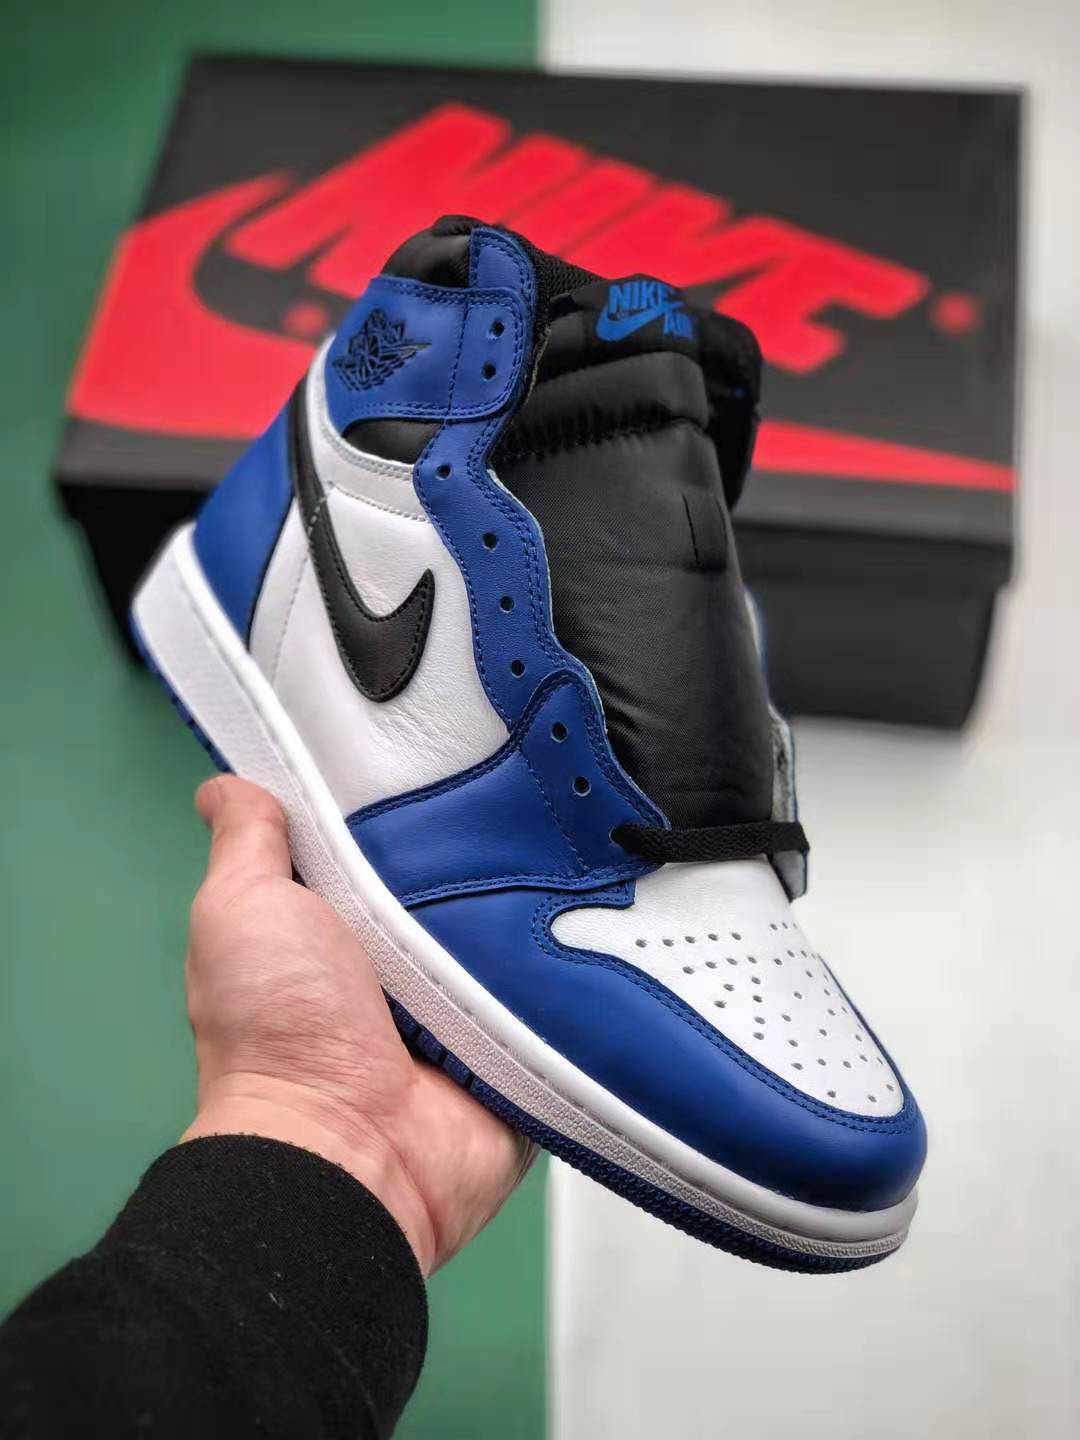 Air Jordan 1 Retro High OG 'Game Royal' 555088-403 - Deluxe Style for Sneaker Enthusiasts